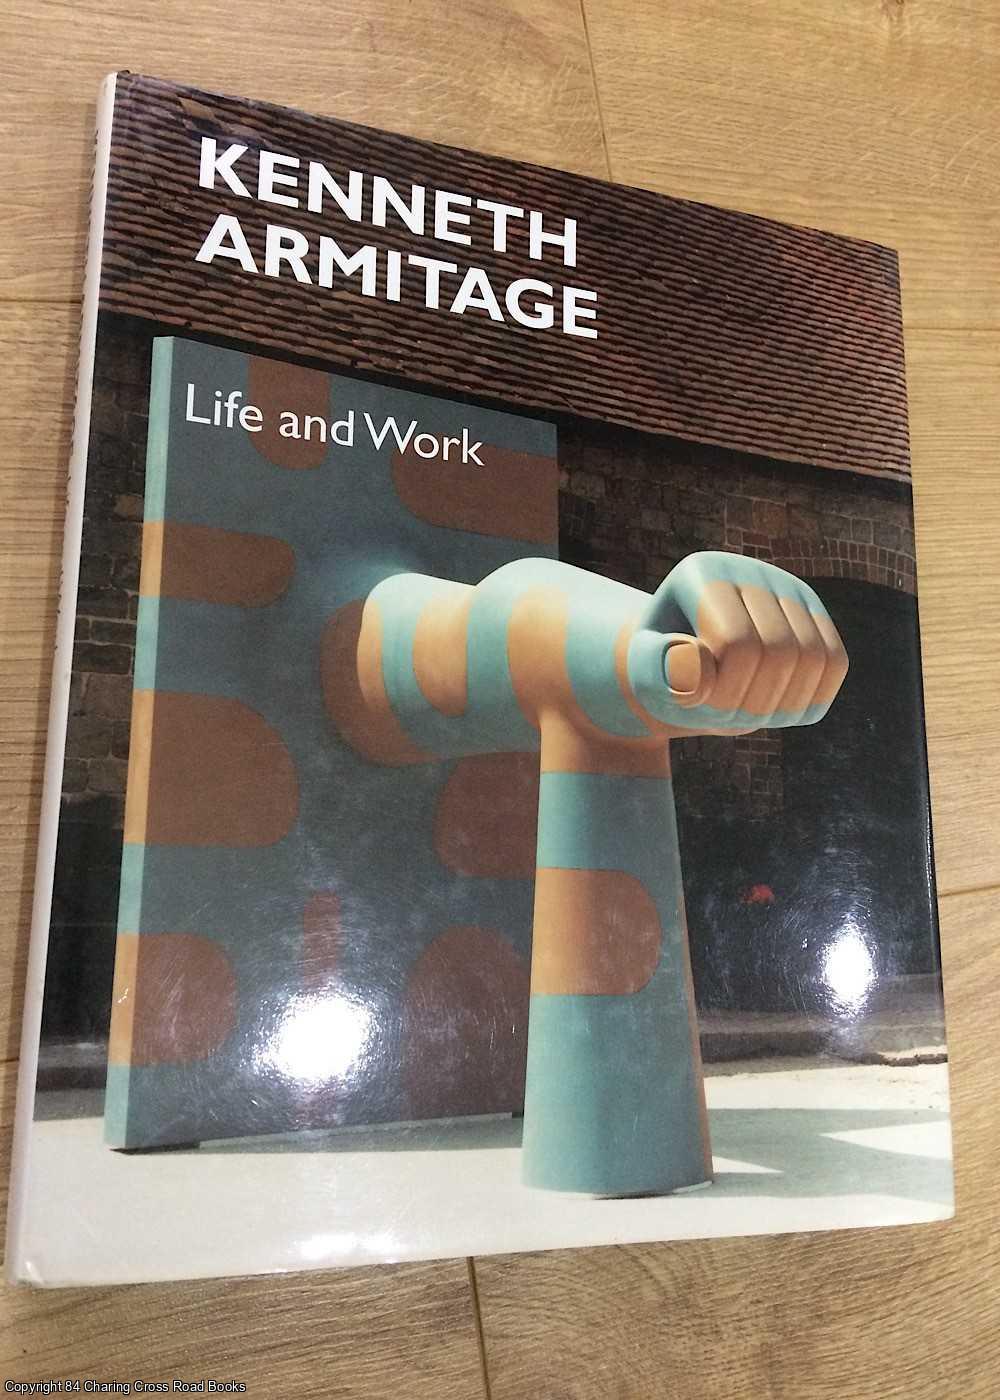 Woollcombe, Tamsyn - Kenneth Armitage: Life And Work